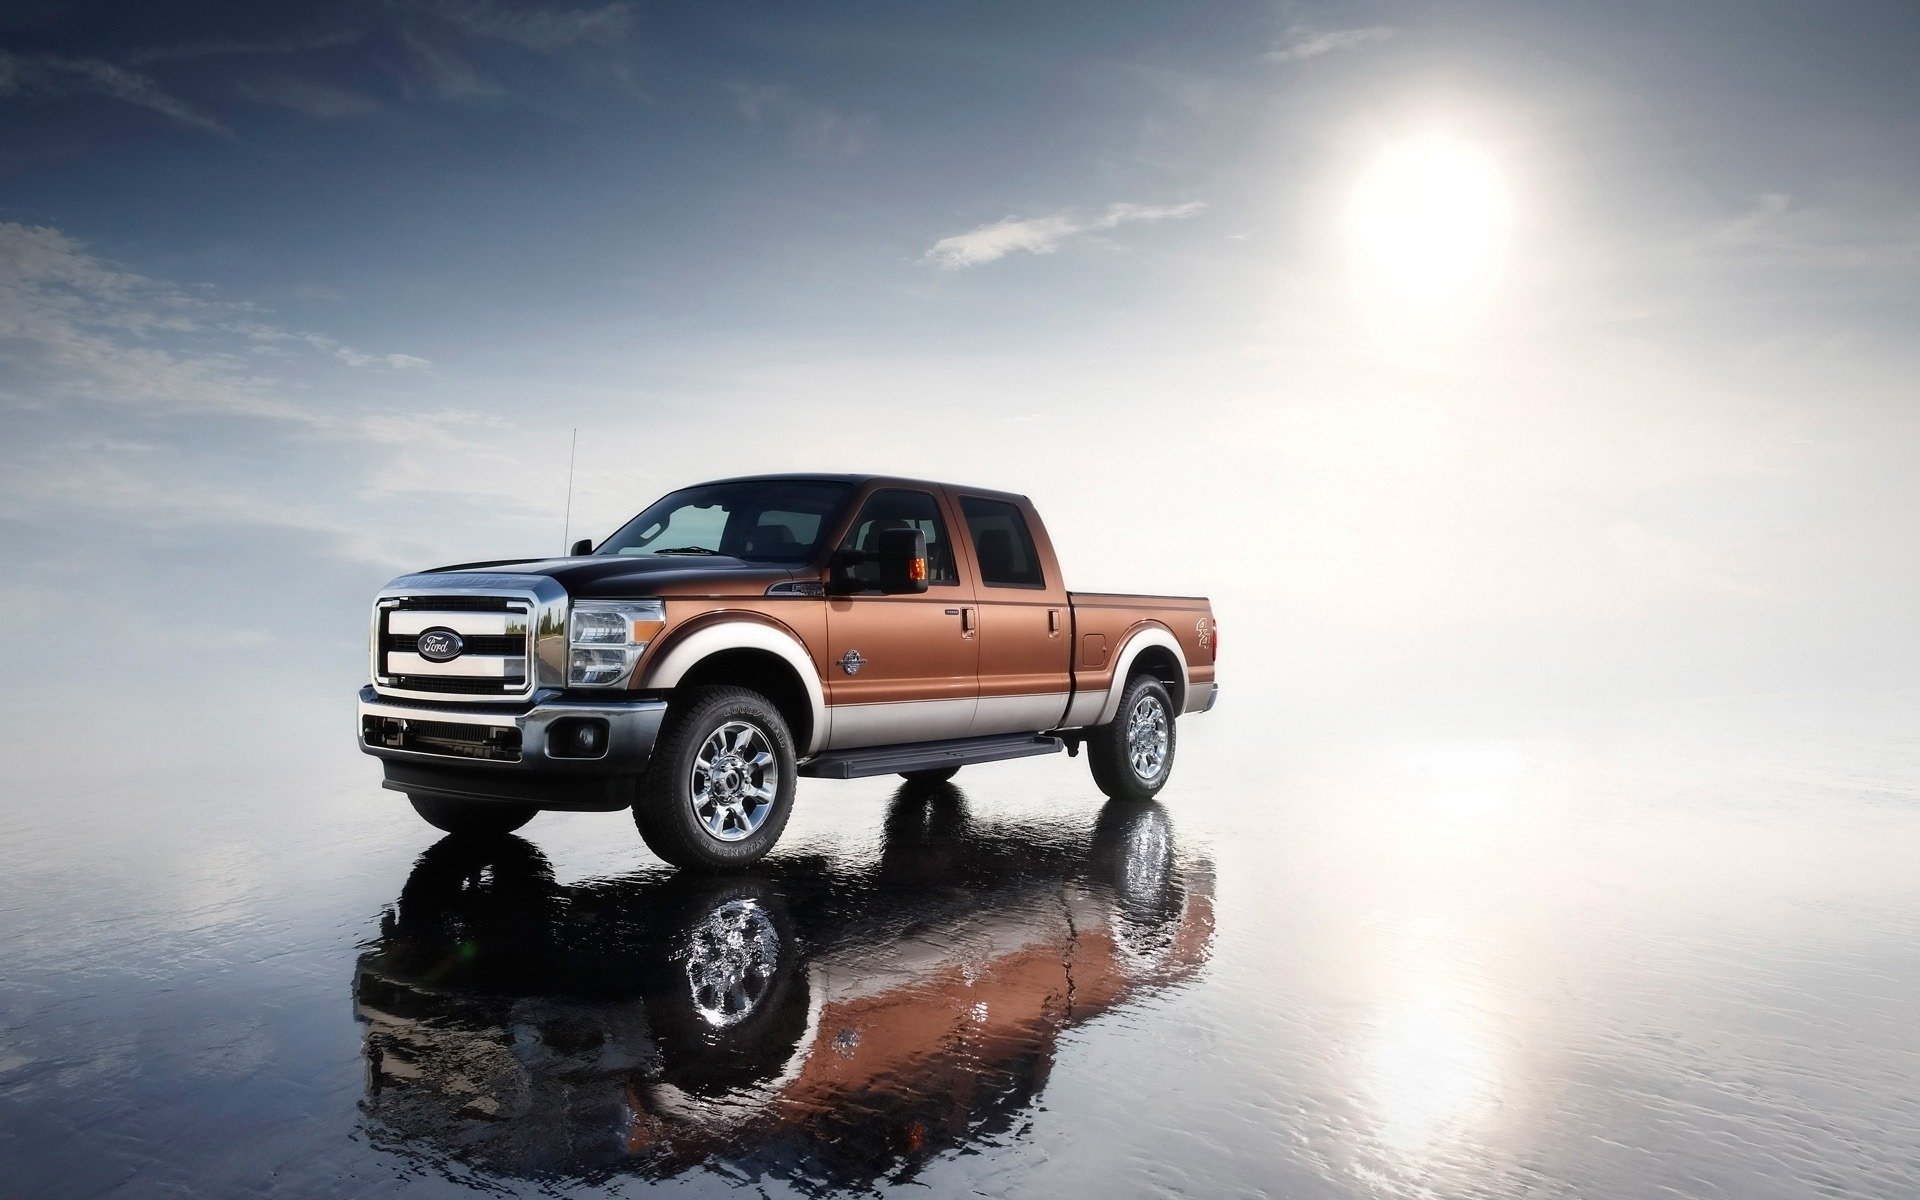 Ford Super Duty Hd Wallpaper Background Image 1920x1200